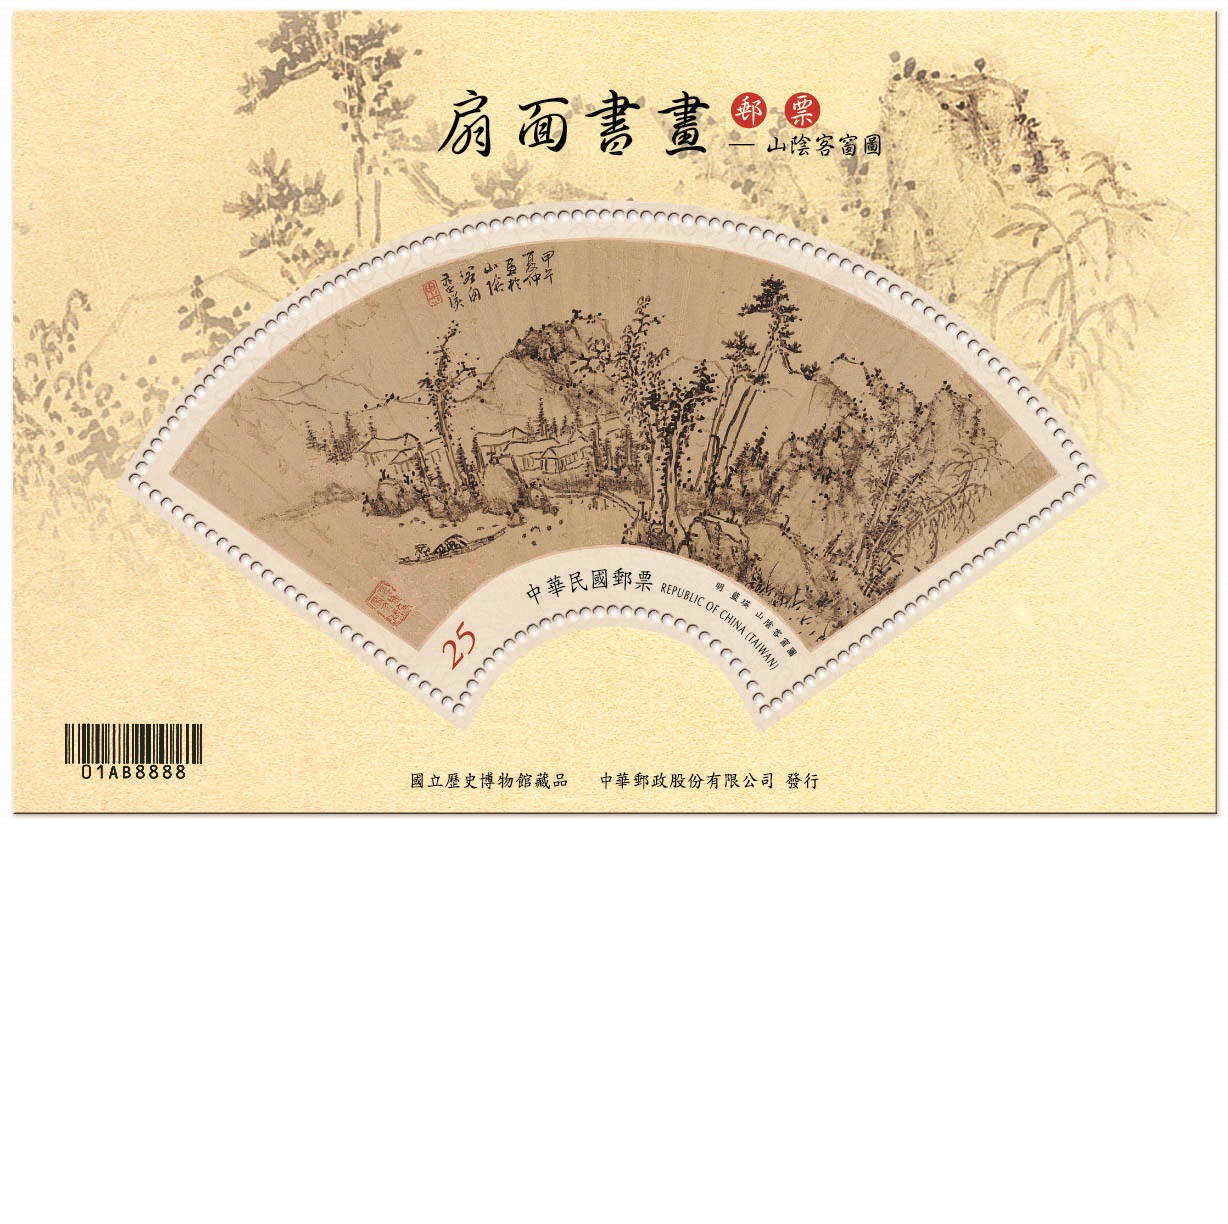 Painting and Calligraphy on the Fan Souvenir Sheet: Traveler at Shanyin County 